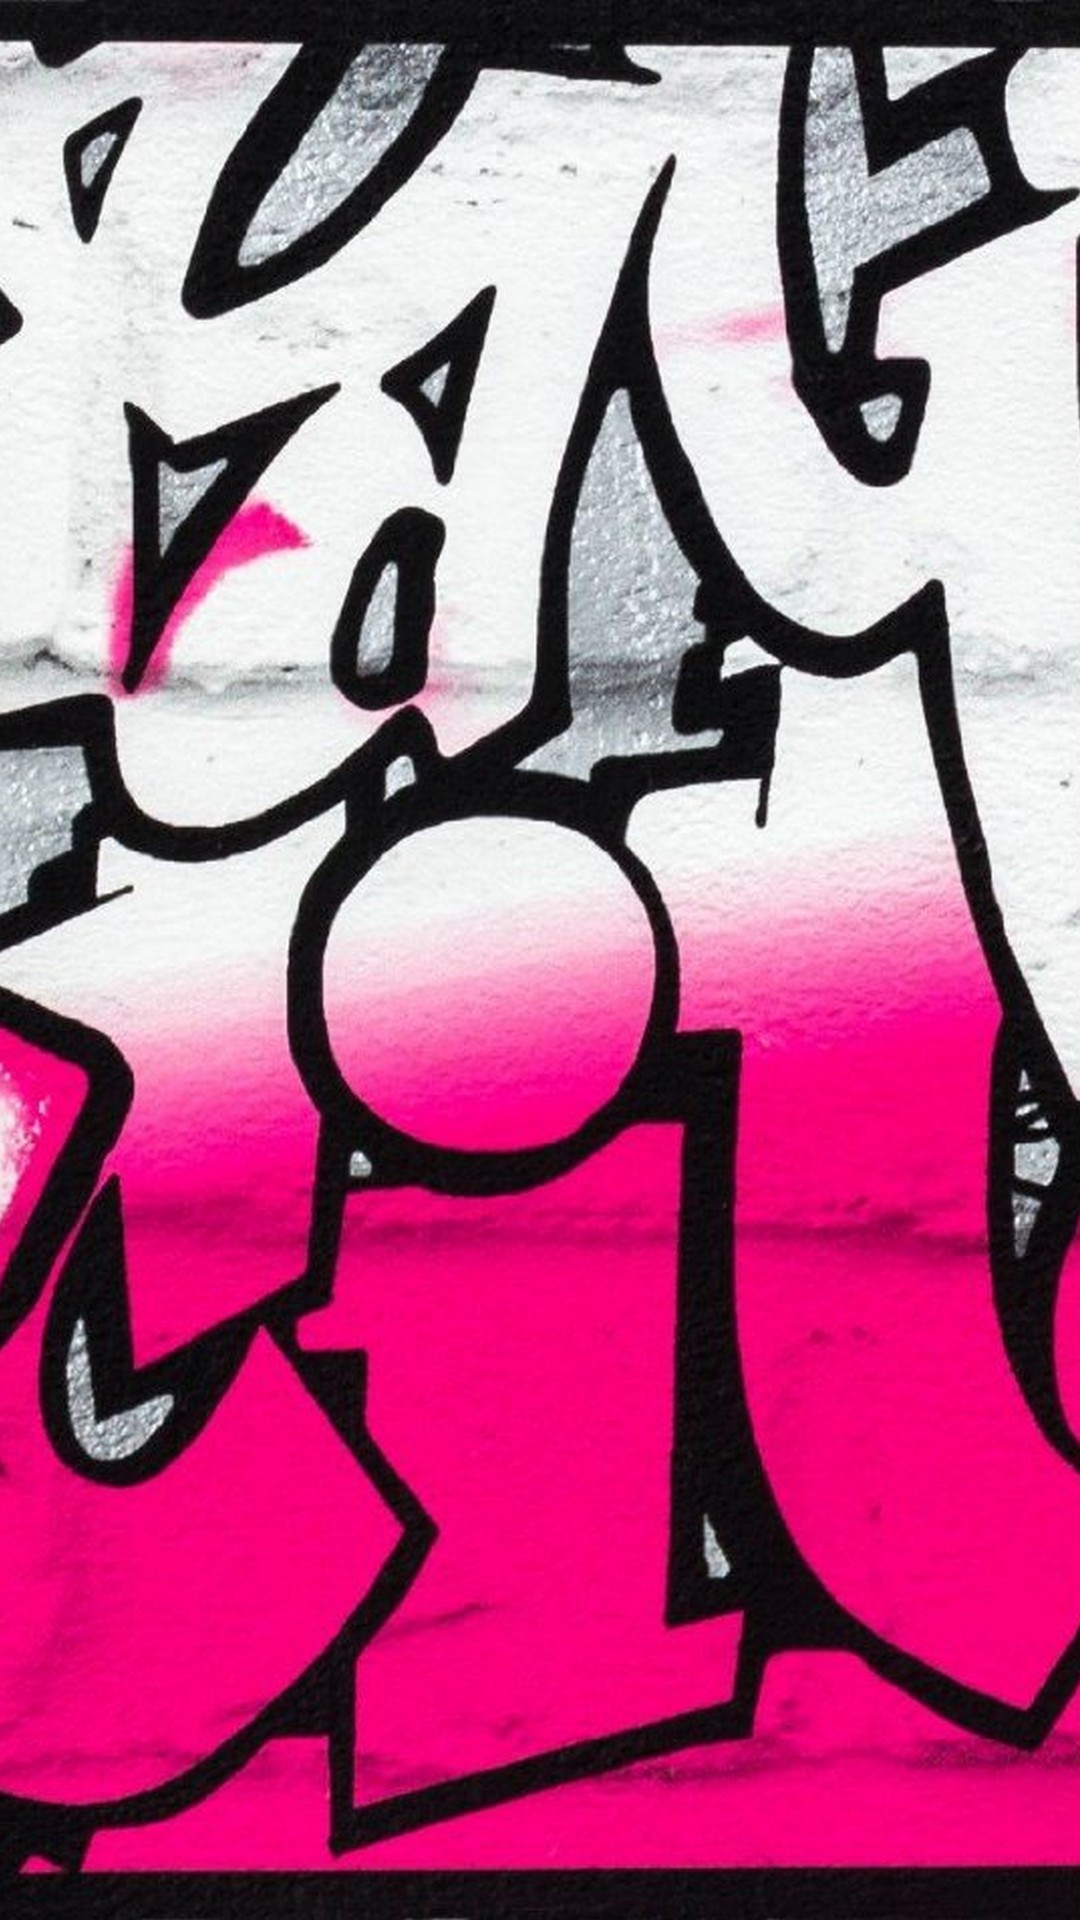 Graffiti Letters Wallpaper Android with image resolution 1080x1920 pixel. You can make this wallpaper for your Android backgrounds, Tablet, Smartphones Screensavers and Mobile Phone Lock Screen